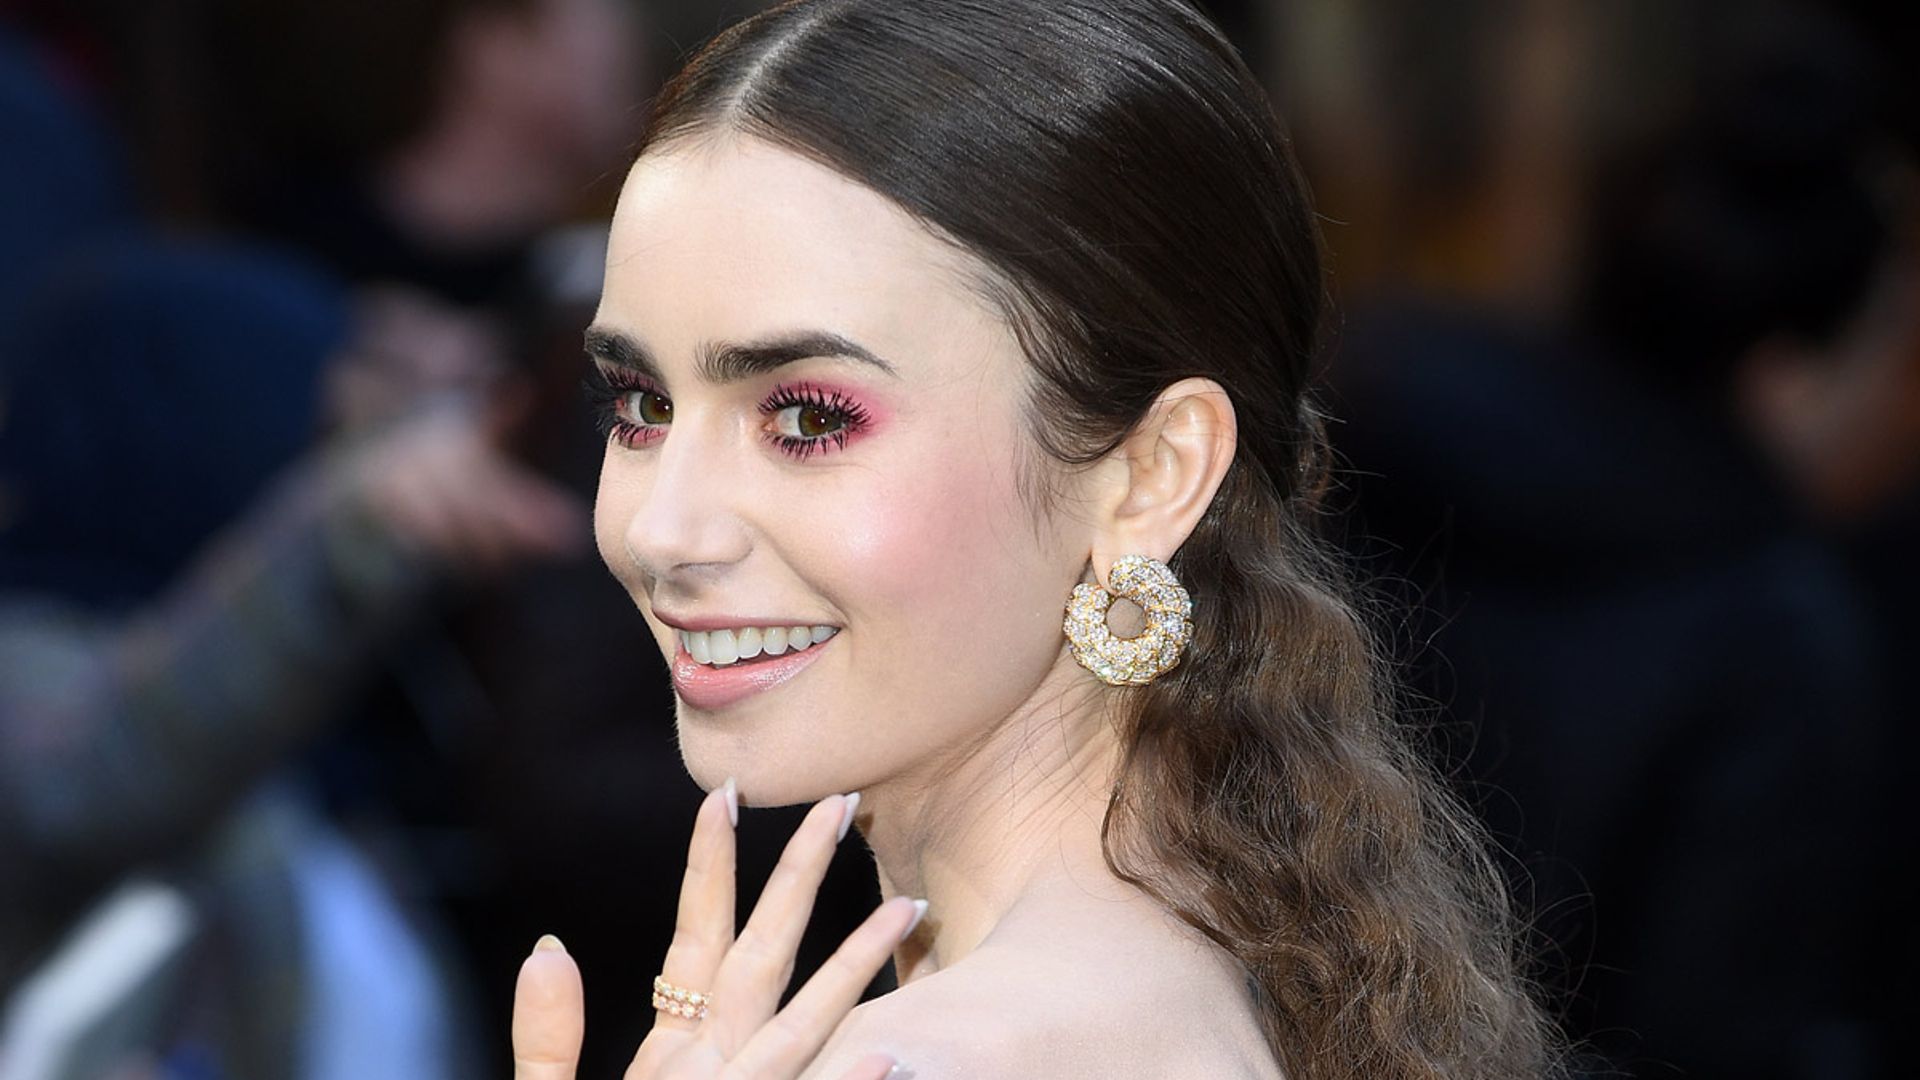 Lily Collins shares stunning unseen wedding photos for special occasion